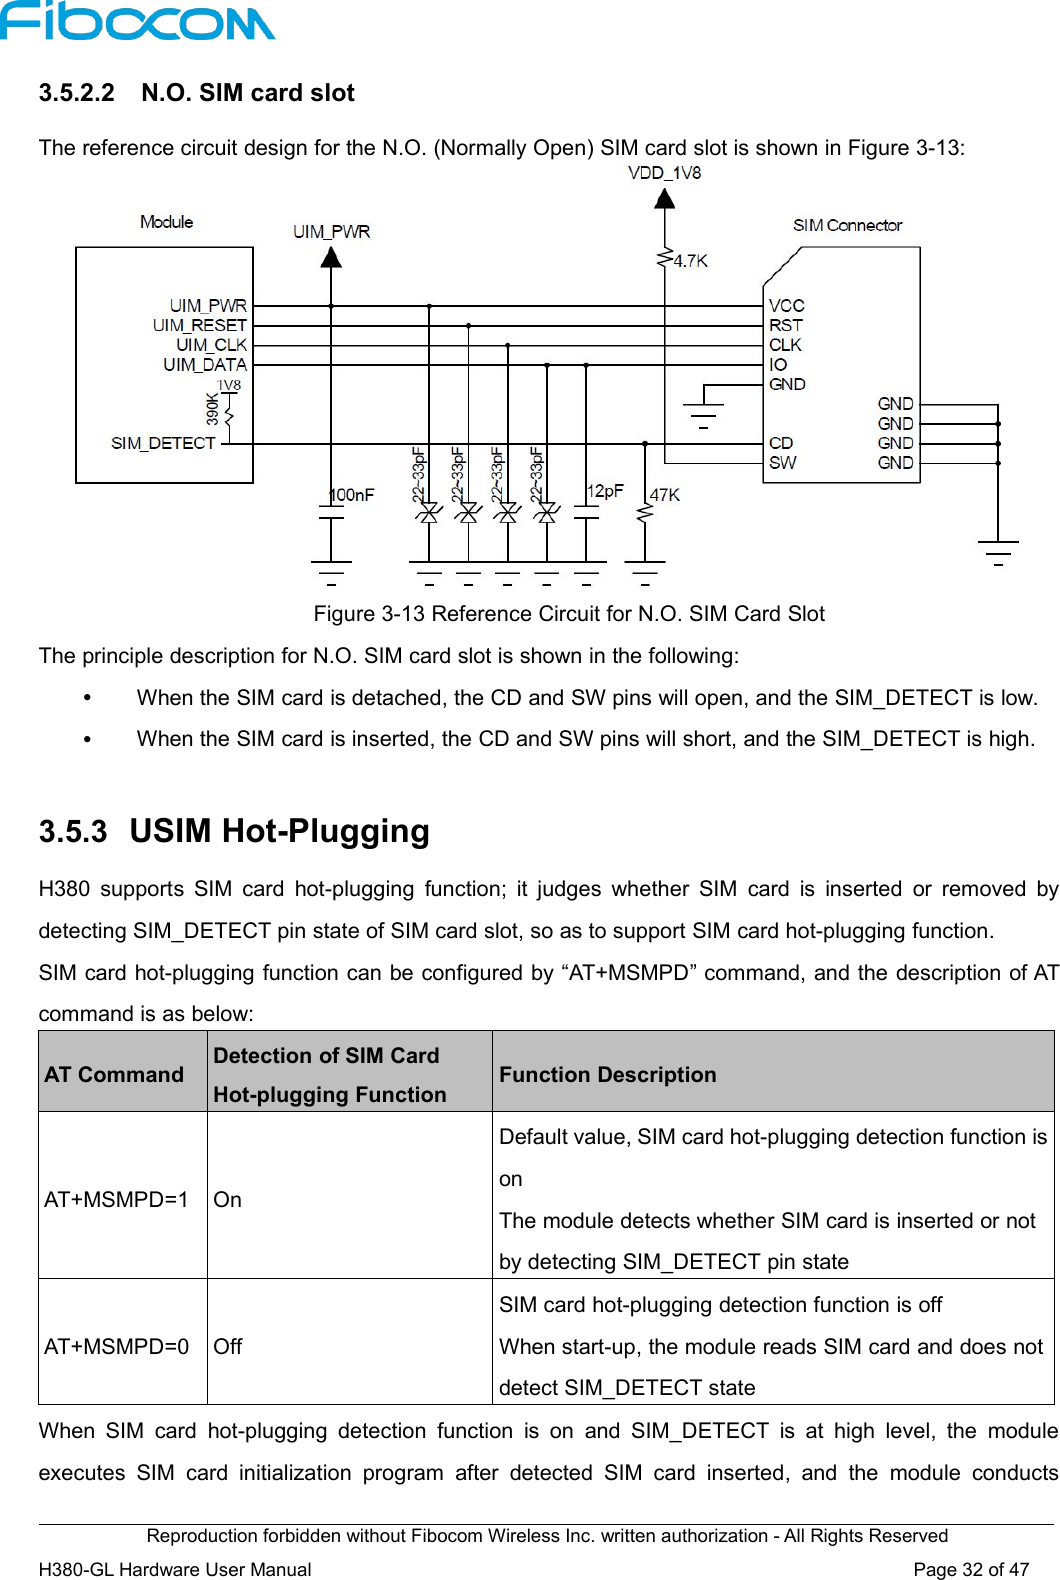 Reproduction forbidden without Fibocom Wireless Inc. written authorization - All Rights ReservedH380-GL Hardware User Manual Page32of473.5.2.2 N.O. SIM card slotThe reference circuit design for the N.O. (Normally Open) SIM card slot is shown in Figure 3-13:Figure 3-13 Reference Circuit for N.O. SIM Card SlotThe principle description for N.O. SIM card slot is shown in the following:When the SIM card is detached, the CD and SW pins will open, and the SIM_DETECT is low.When the SIM card is inserted, the CD and SW pins will short, and the SIM_DETECT is high.3.5.3 USIM Hot-PluggingH380 supports SIM card hot-plugging function; it judges whether SIM card is inserted or removed bydetecting SIM_DETECT pin state of SIM card slot, so as to support SIM card hot-plugging function.SIM card hot-plugging function can be configured by “AT+MSMPD” command, and the description of ATcommand is as below:AT CommandDetection of SIM CardHot-plugging FunctionFunction DescriptionAT+MSMPD=1OnDefault value, SIM card hot-plugging detection function isonThe module detects whether SIM card is inserted or notby detecting SIM_DETECT pin stateAT+MSMPD=0OffSIM card hot-plugging detection function is offWhen start-up, the module reads SIM card and does notdetect SIM_DETECT stateWhen SIM card hot-plugging detection function is on and SIM_DETECT is at high level, the moduleexecutes SIM card initialization program after detected SIM card inserted, and the module conducts